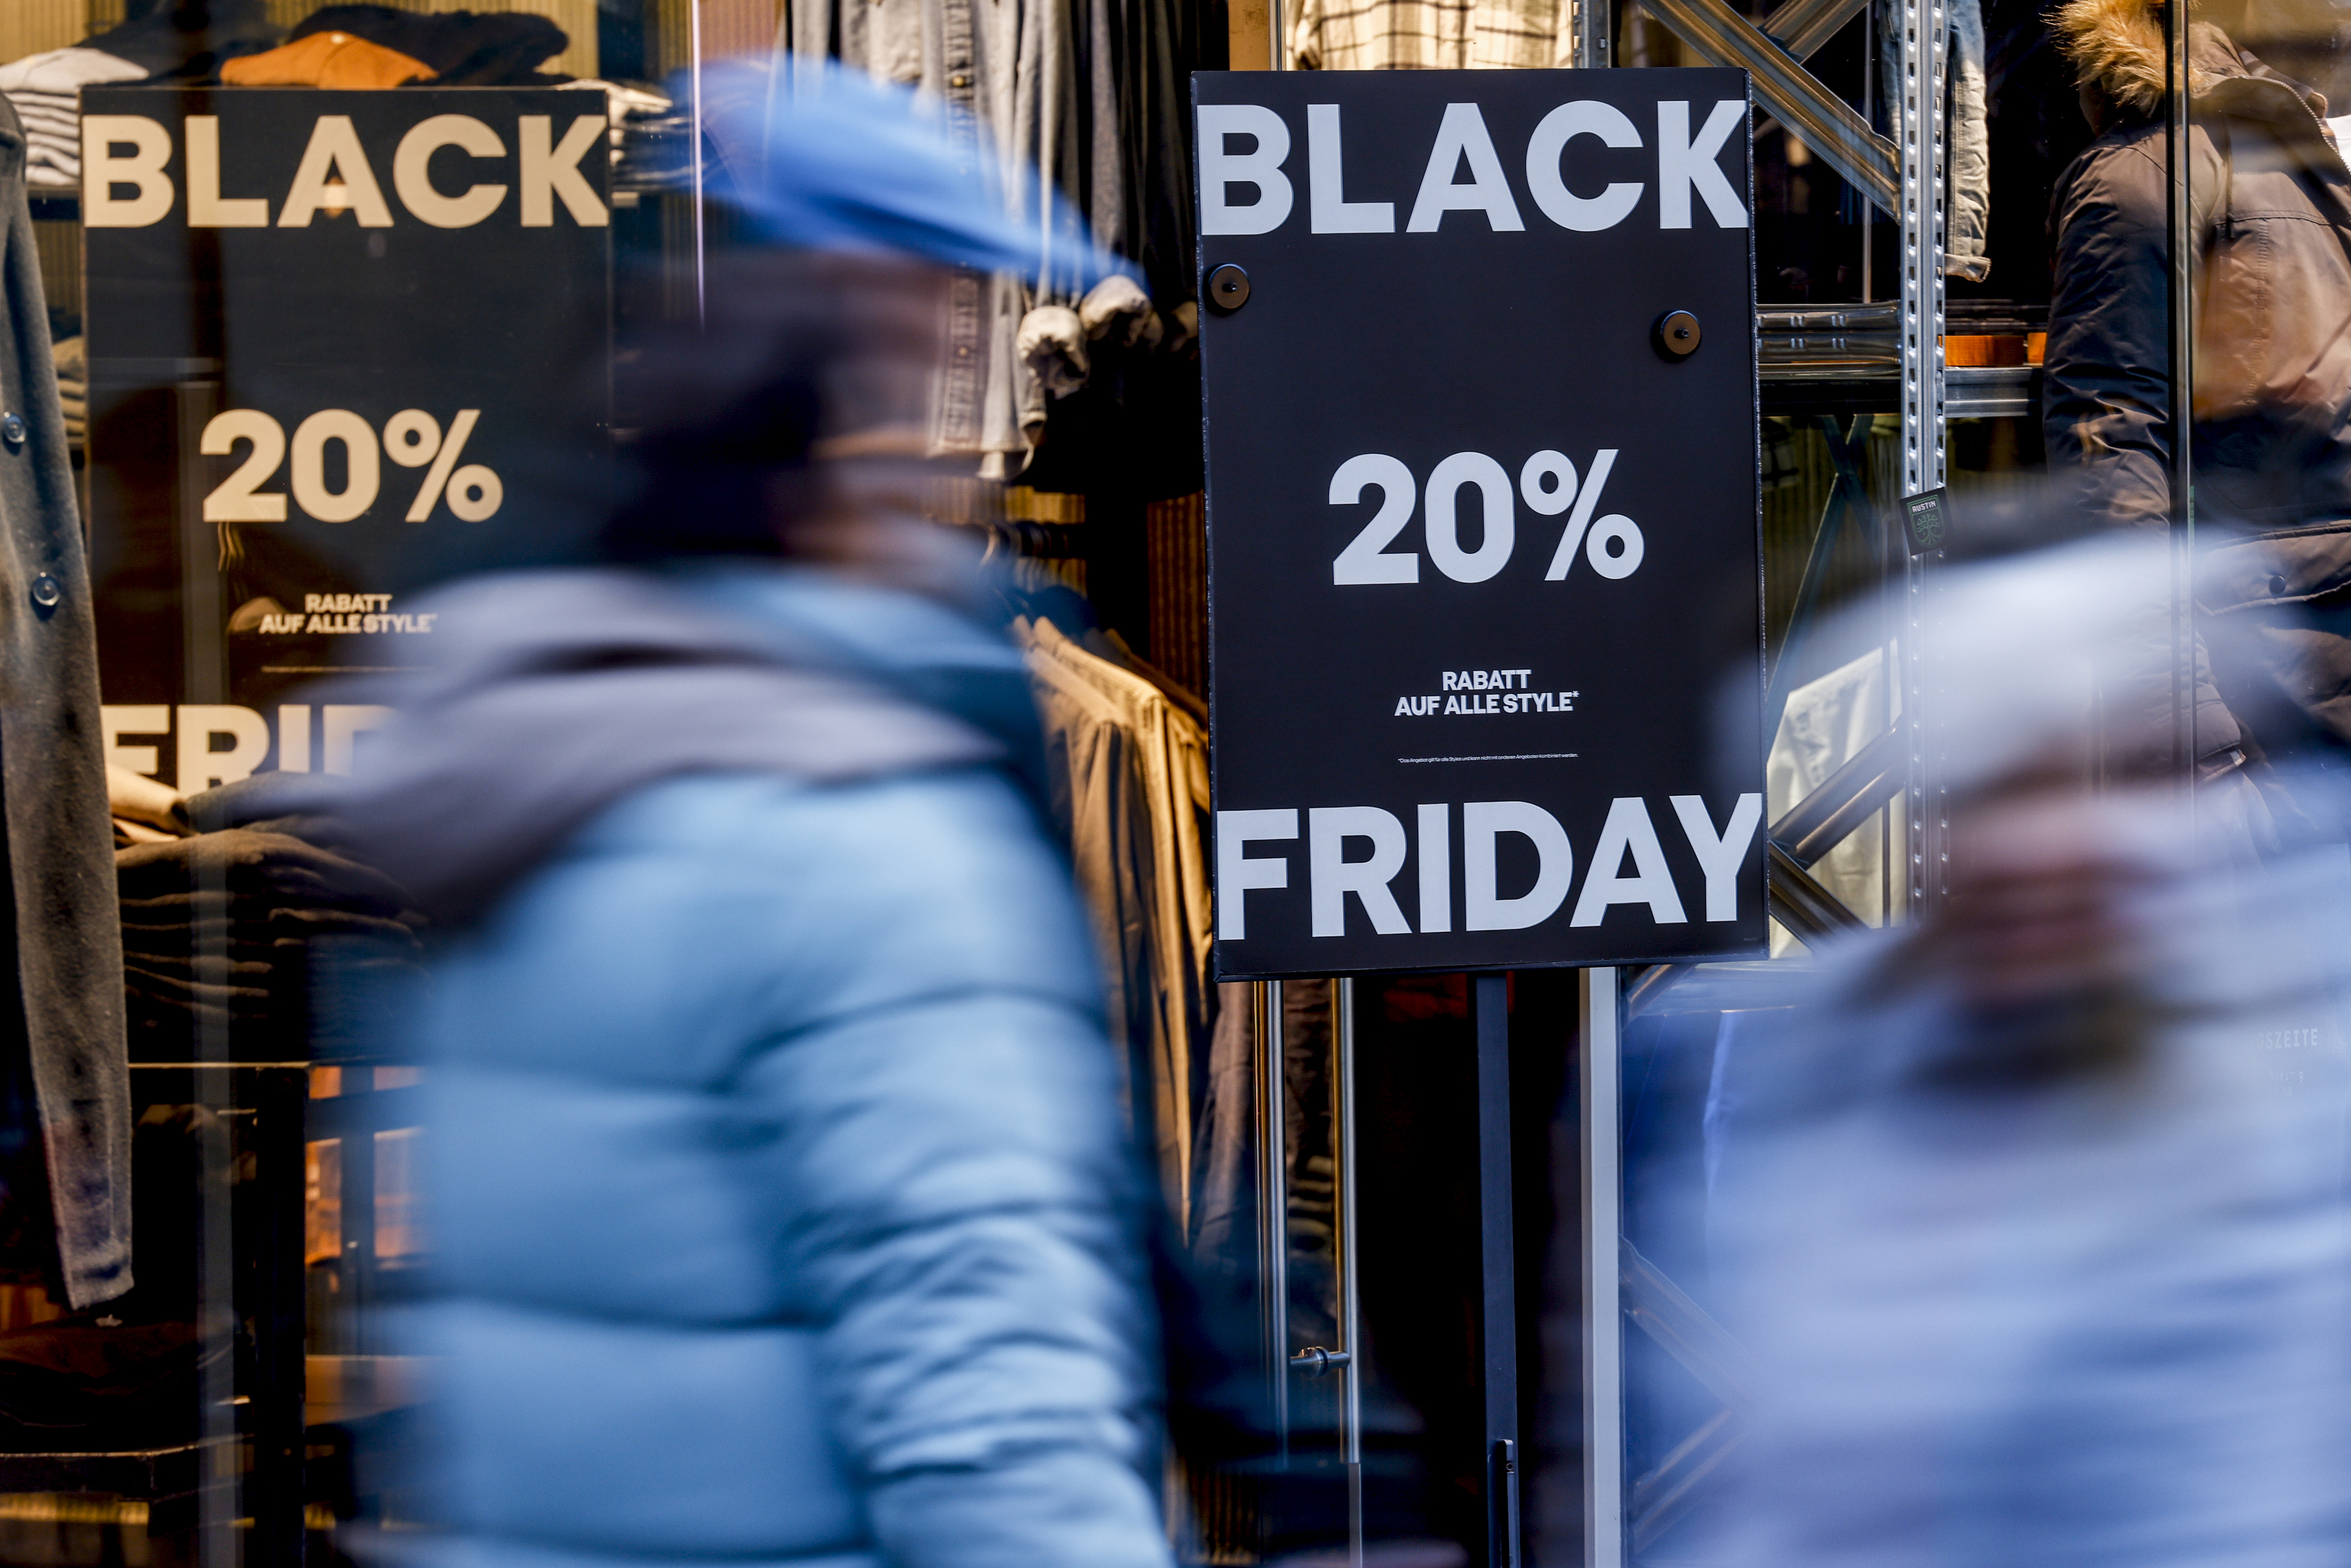 People walking past a shop with Black Friday signs in the window